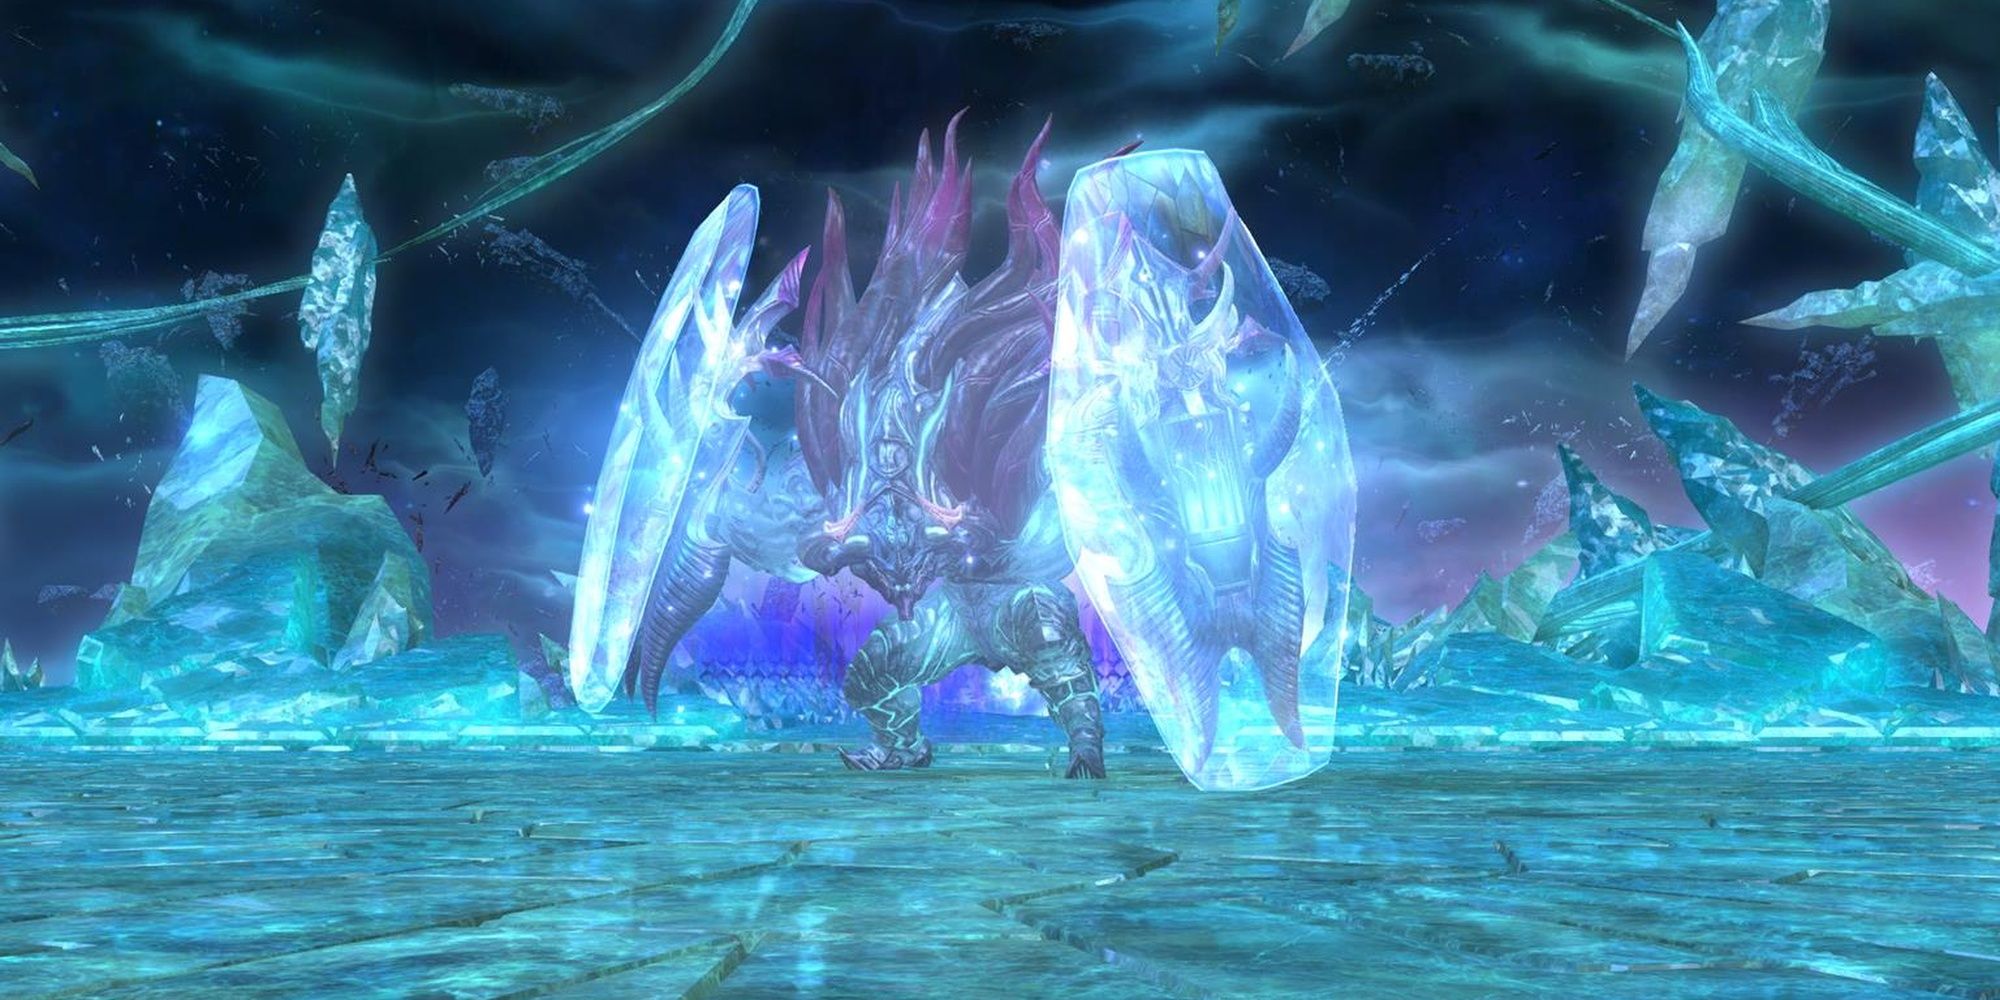 The Aitiascope dungeon from Final Fantasy 14: Endwalker. A beast holding an energy shield in each hand stands on a platform of blue crystal.